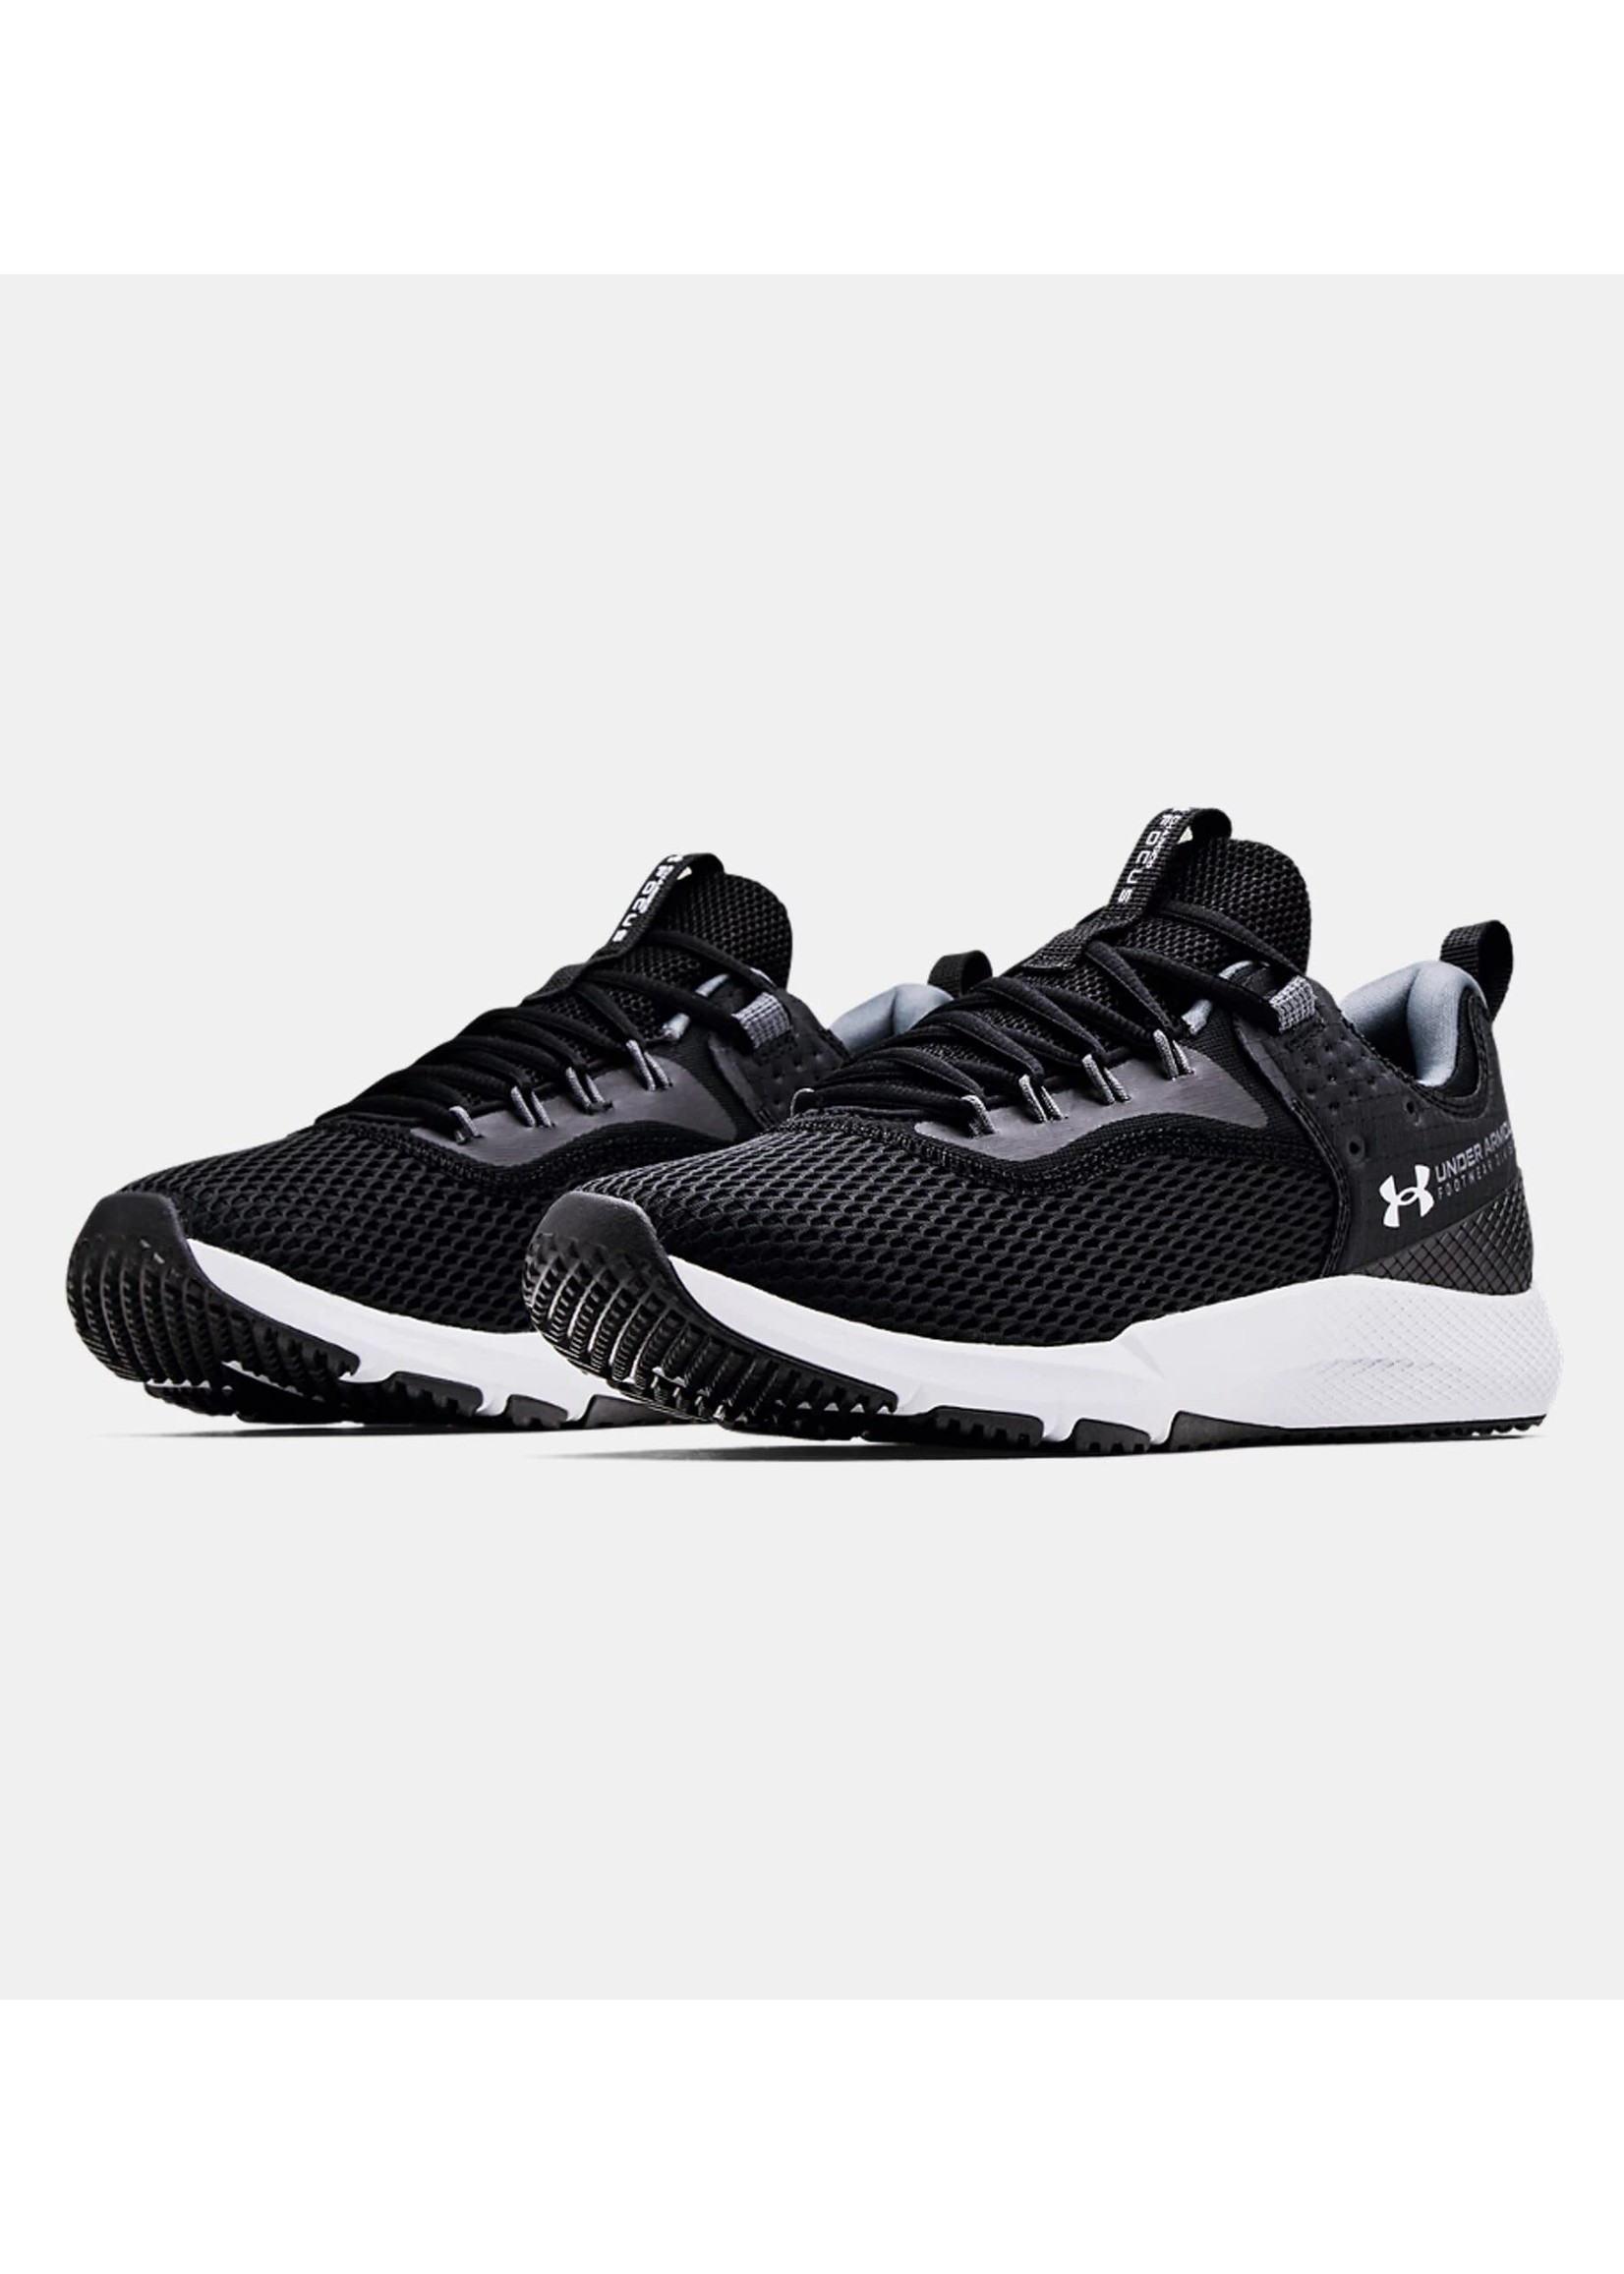 UNDER ARMOUR Souliers CHARGED FOCUS (Homme)